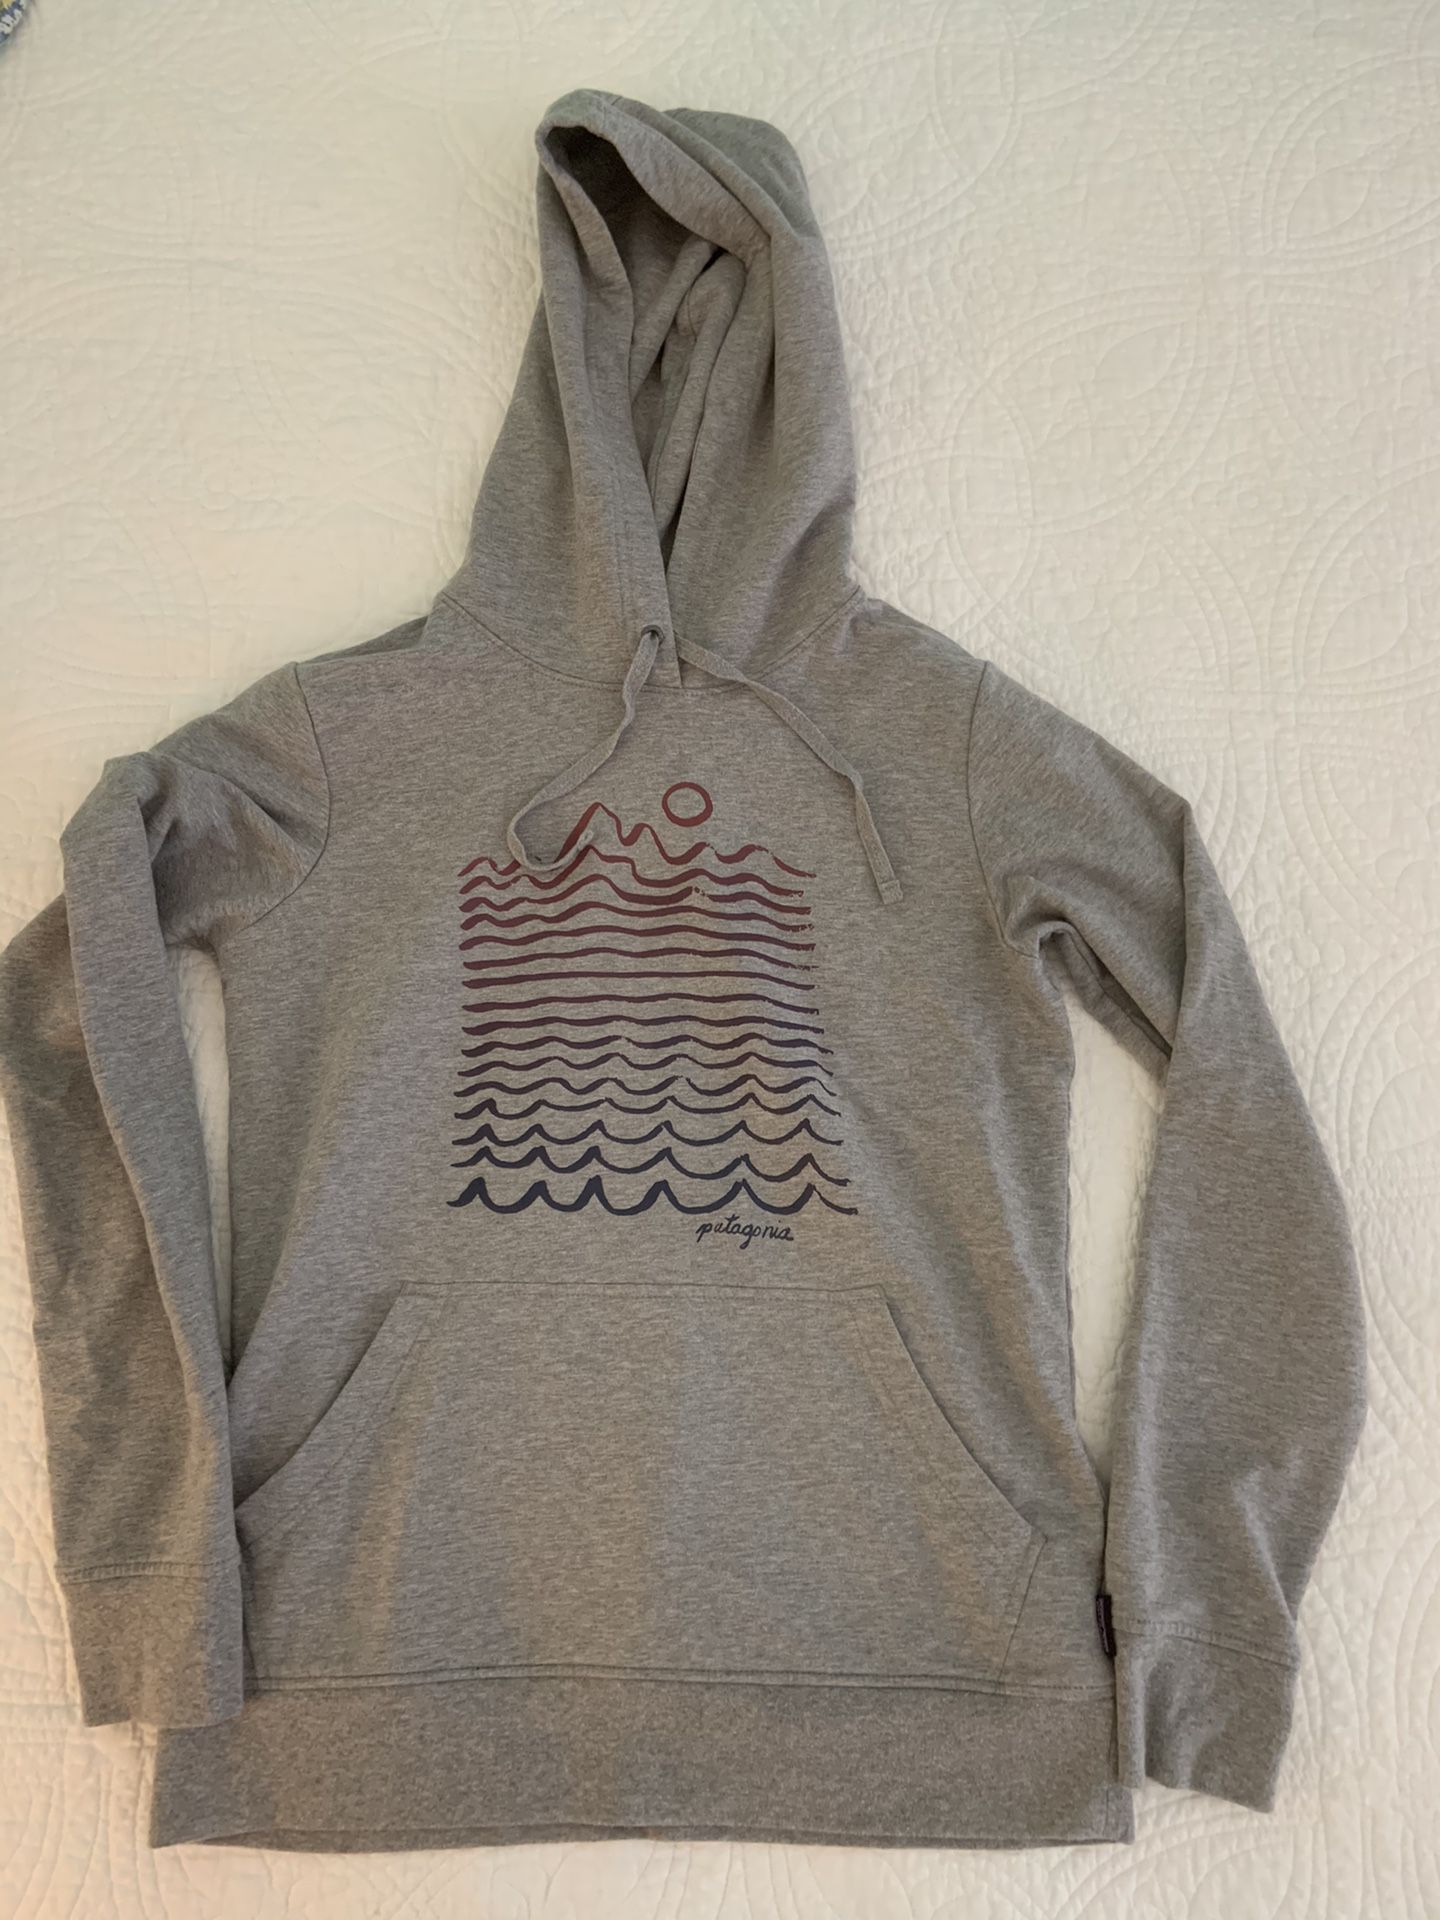 Patagonia women’s hoodie, size small